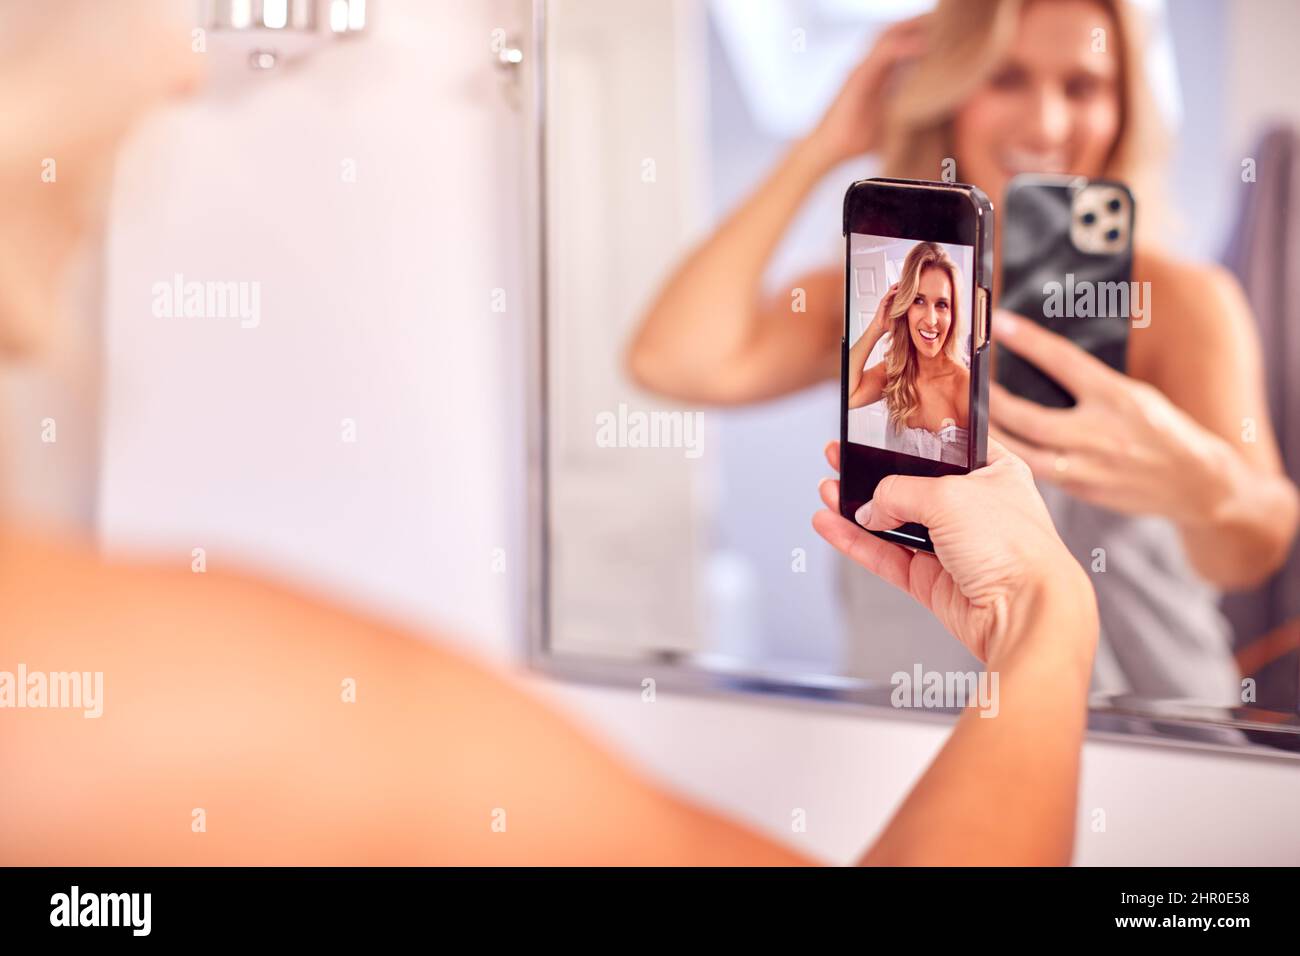 Mature Woman Getting Ready In Bathroom At Home Posing For Selfie On Mobile Phone Stock Photo